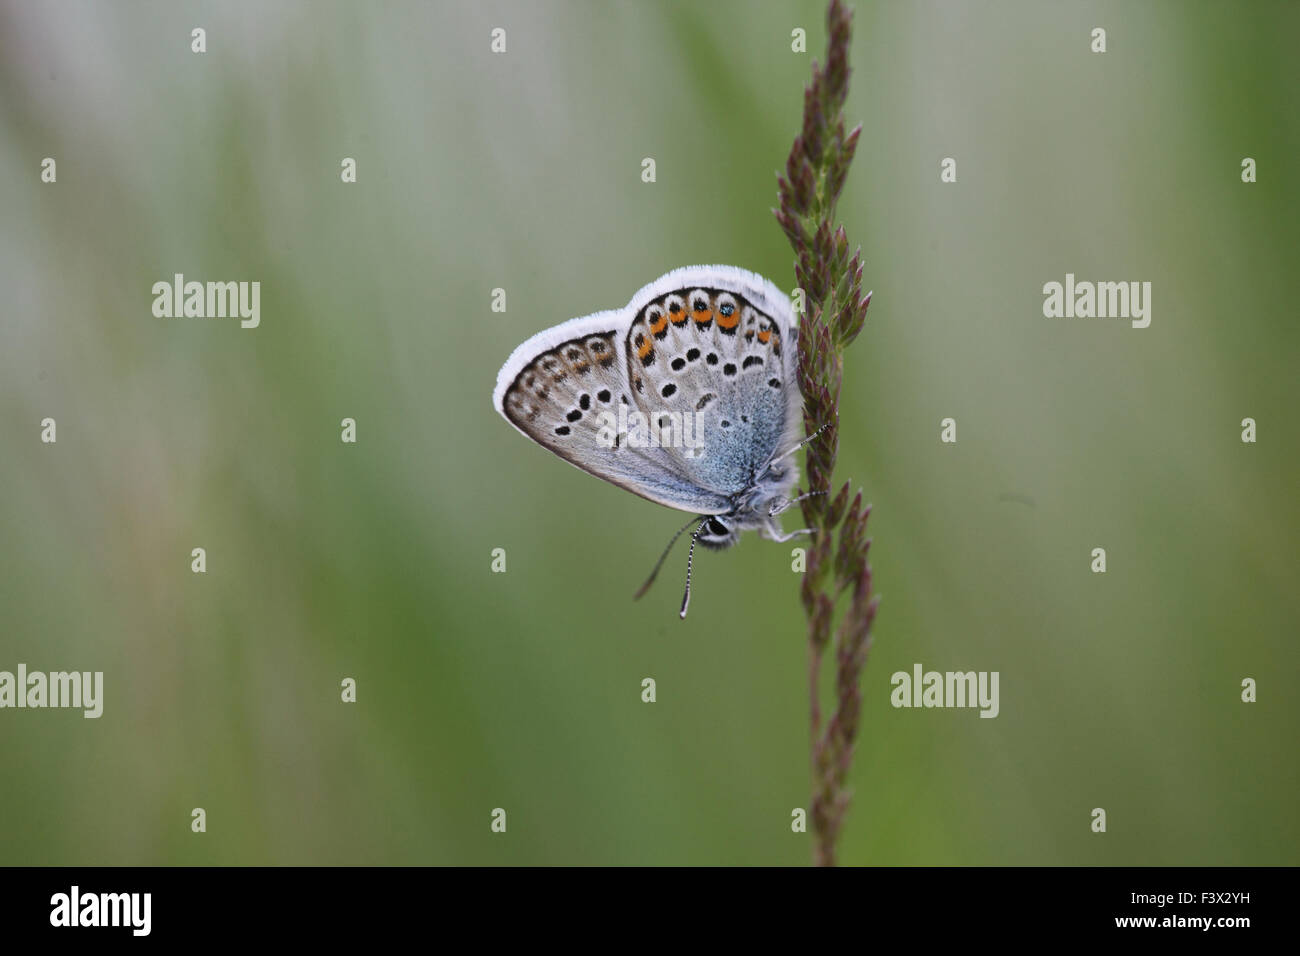 Male at rest on grass stalk Hungary May 2015 Stock Photo